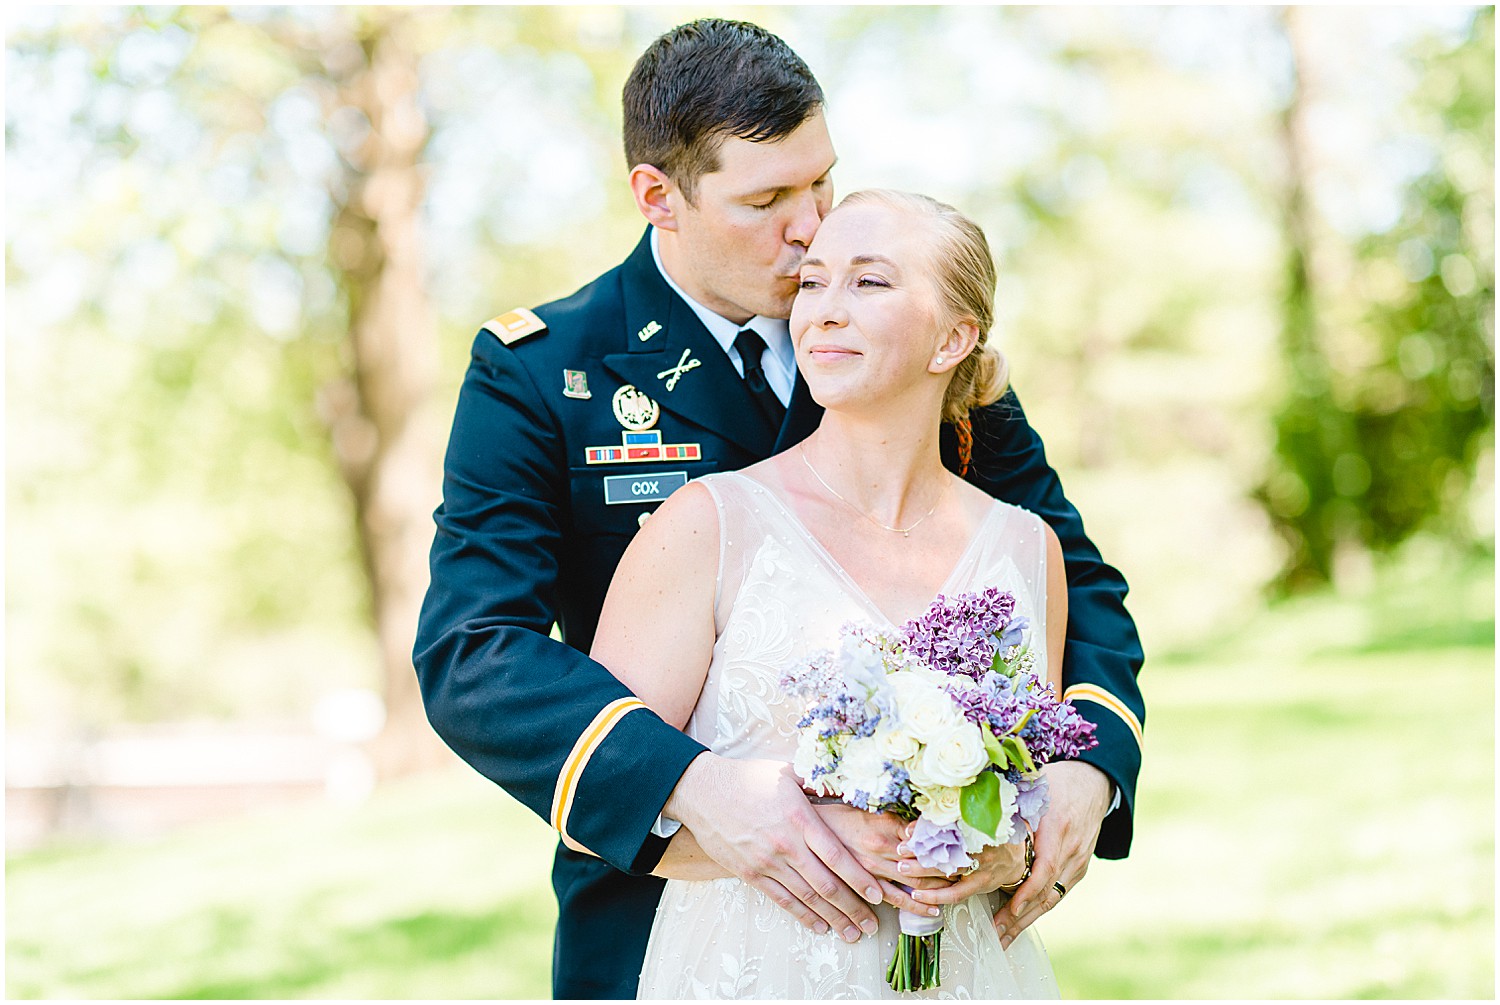 bride and groom kiss at missouri governor's garden wedding